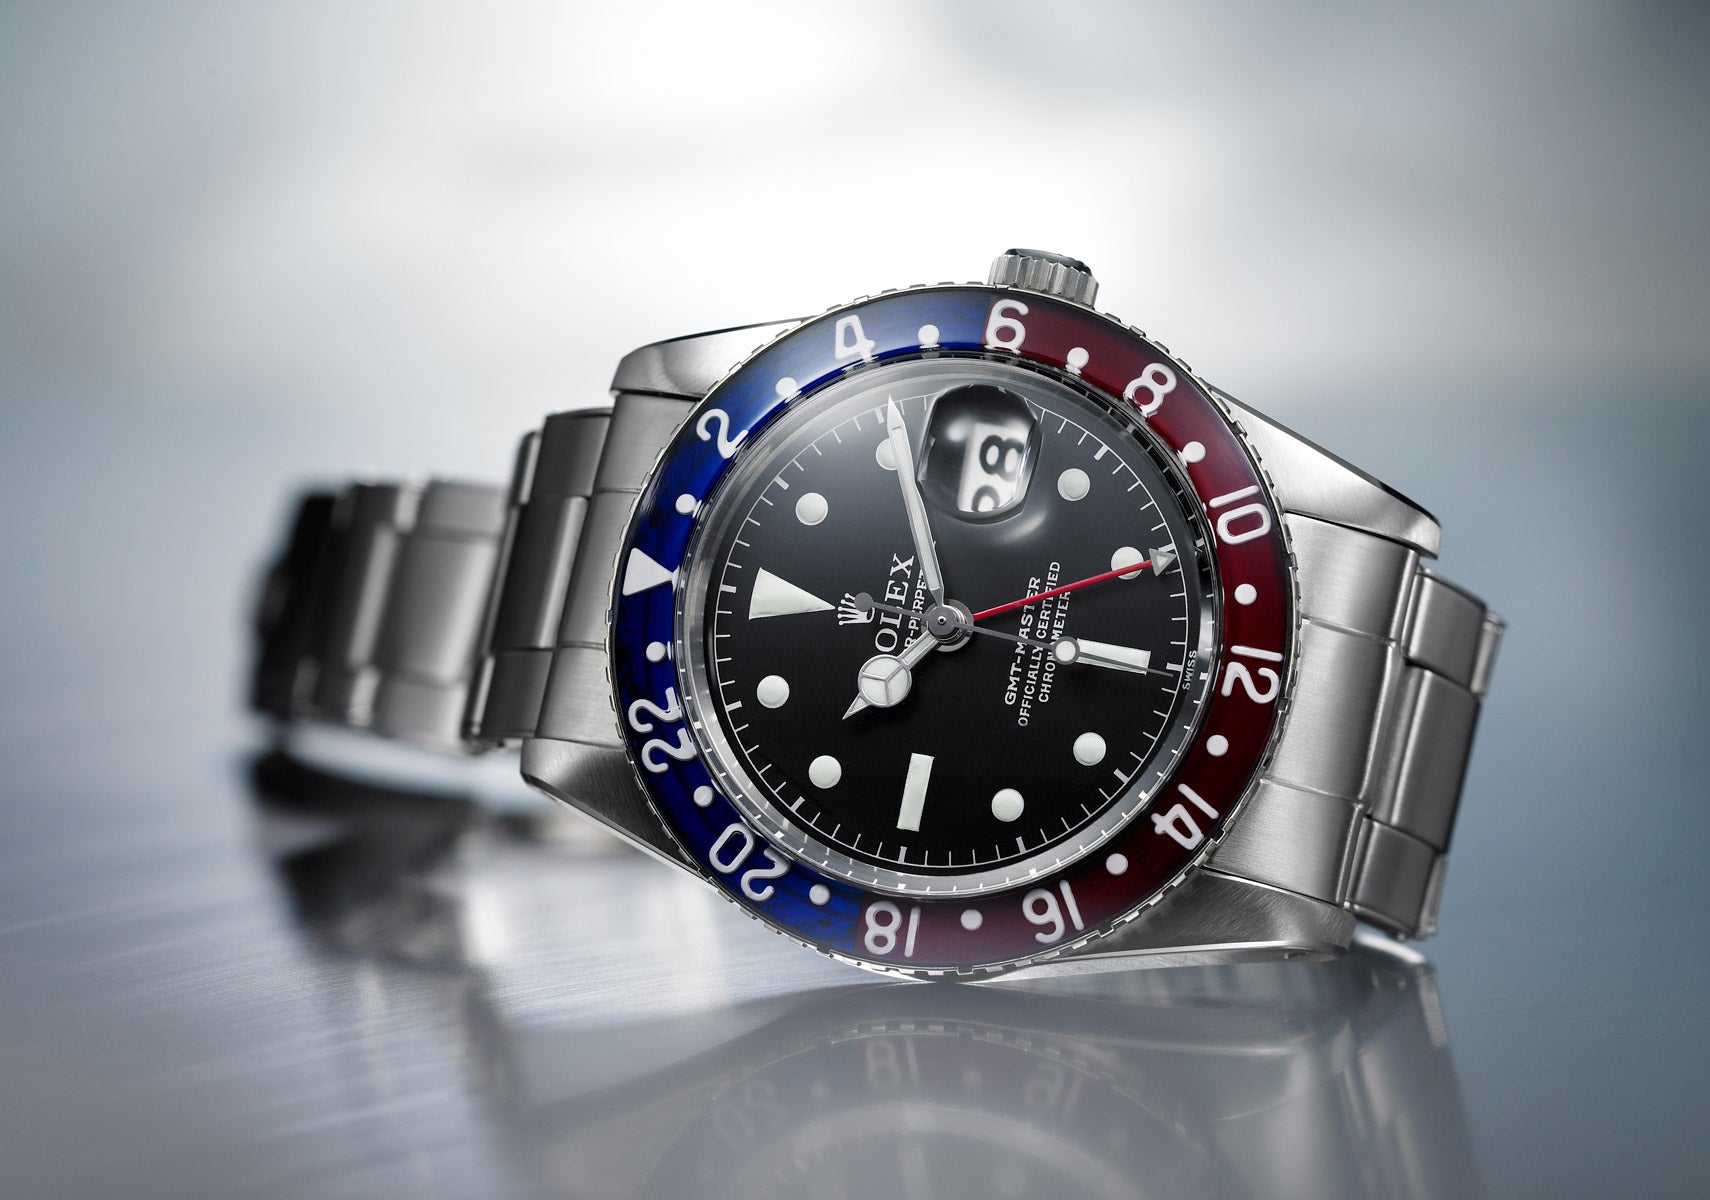 Rolex Oyster Perpetual GMT-Master II with Black Dial on Side at Fink's Jewelers